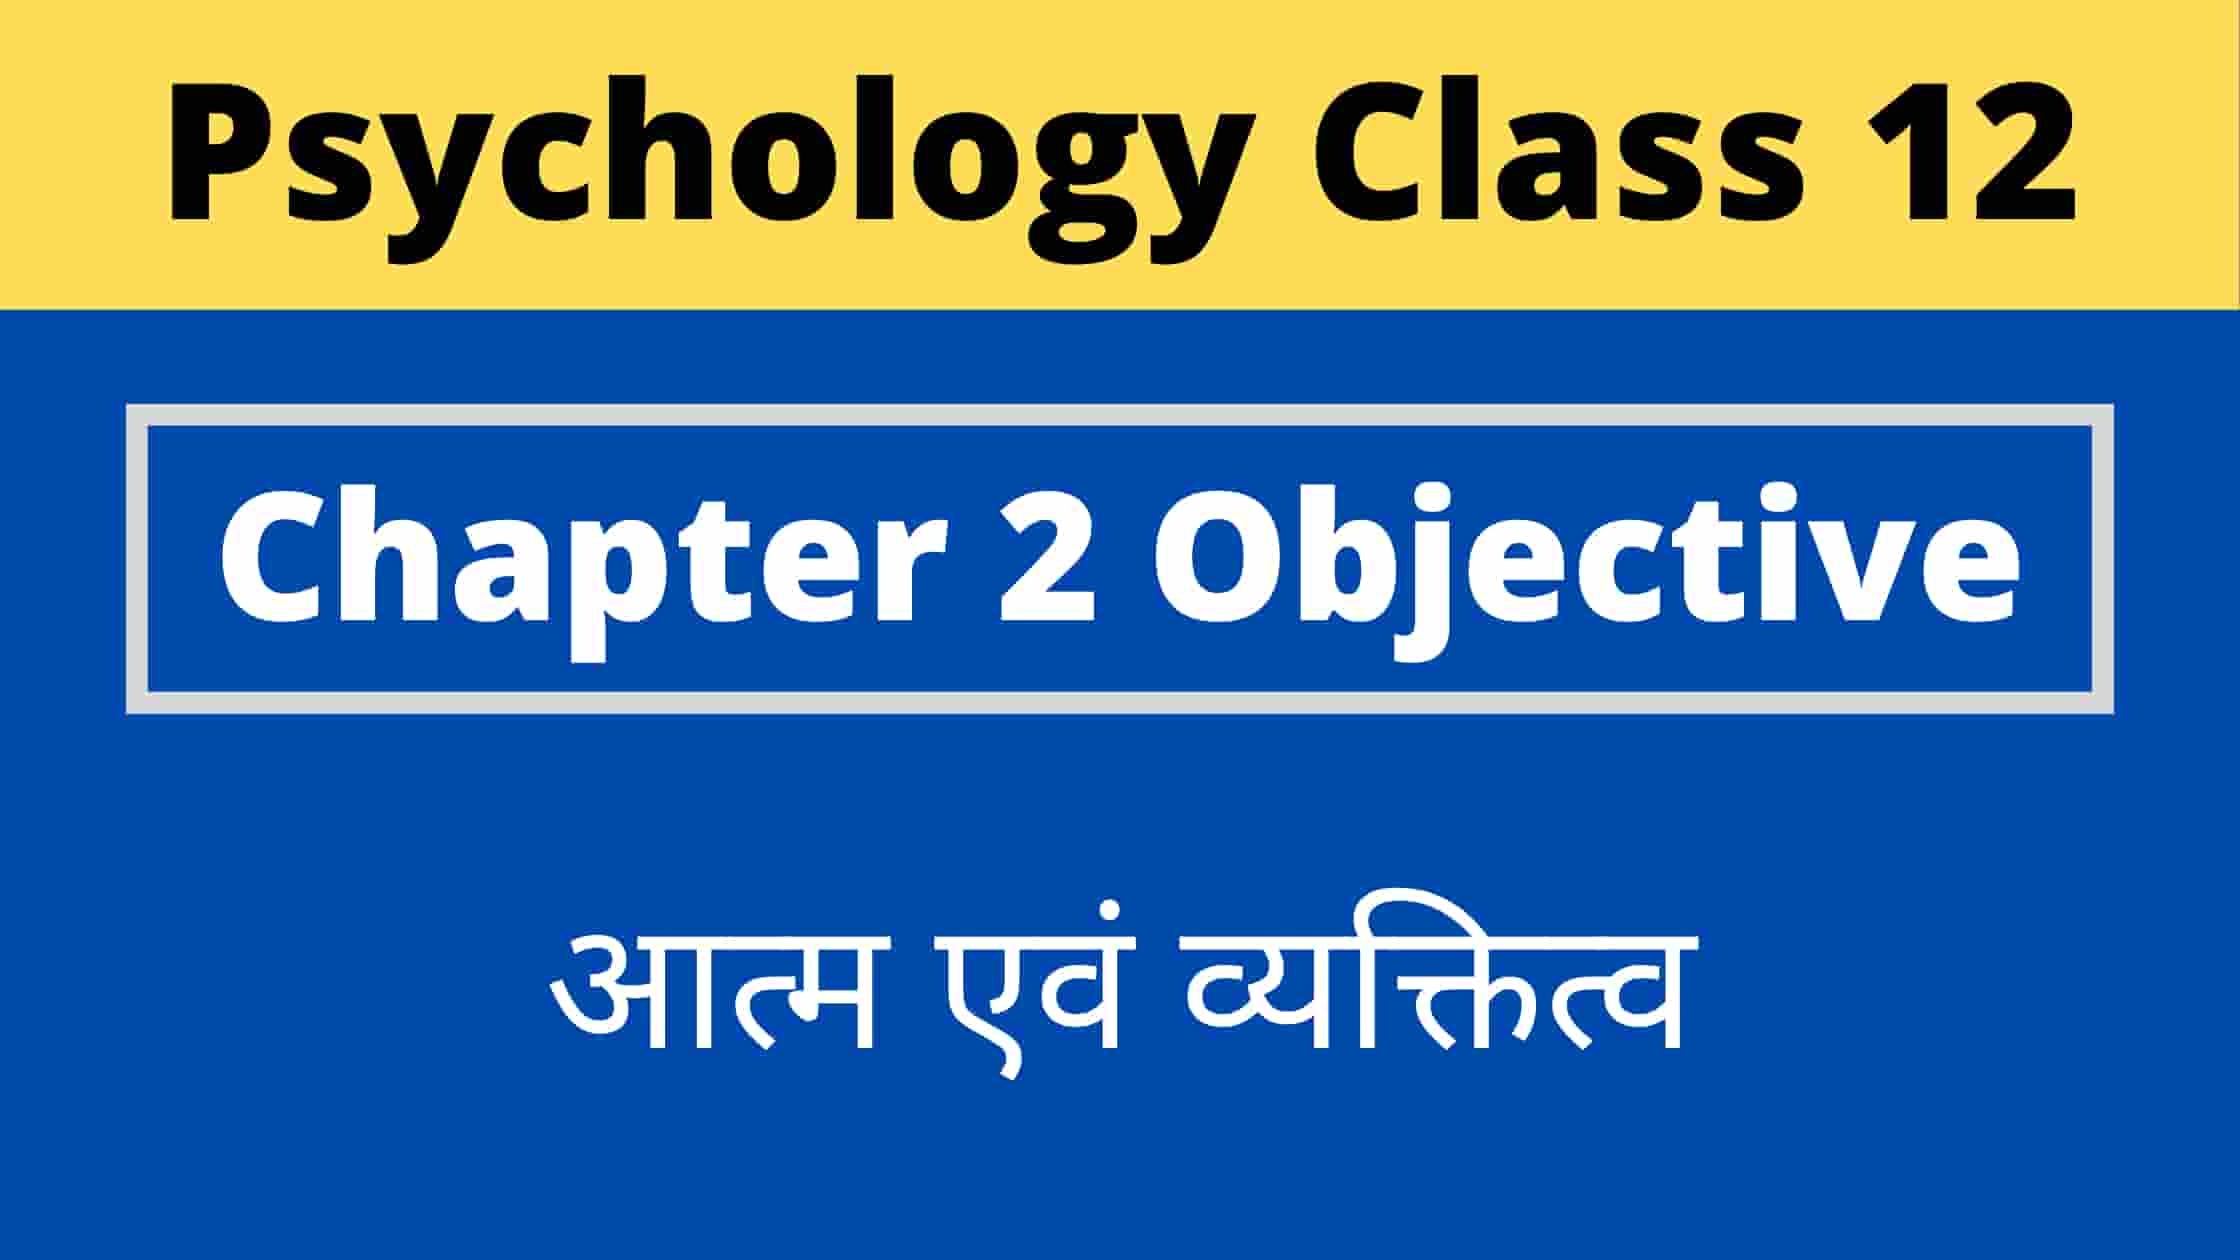 You are currently viewing Psychology Class 12 Chapter 2